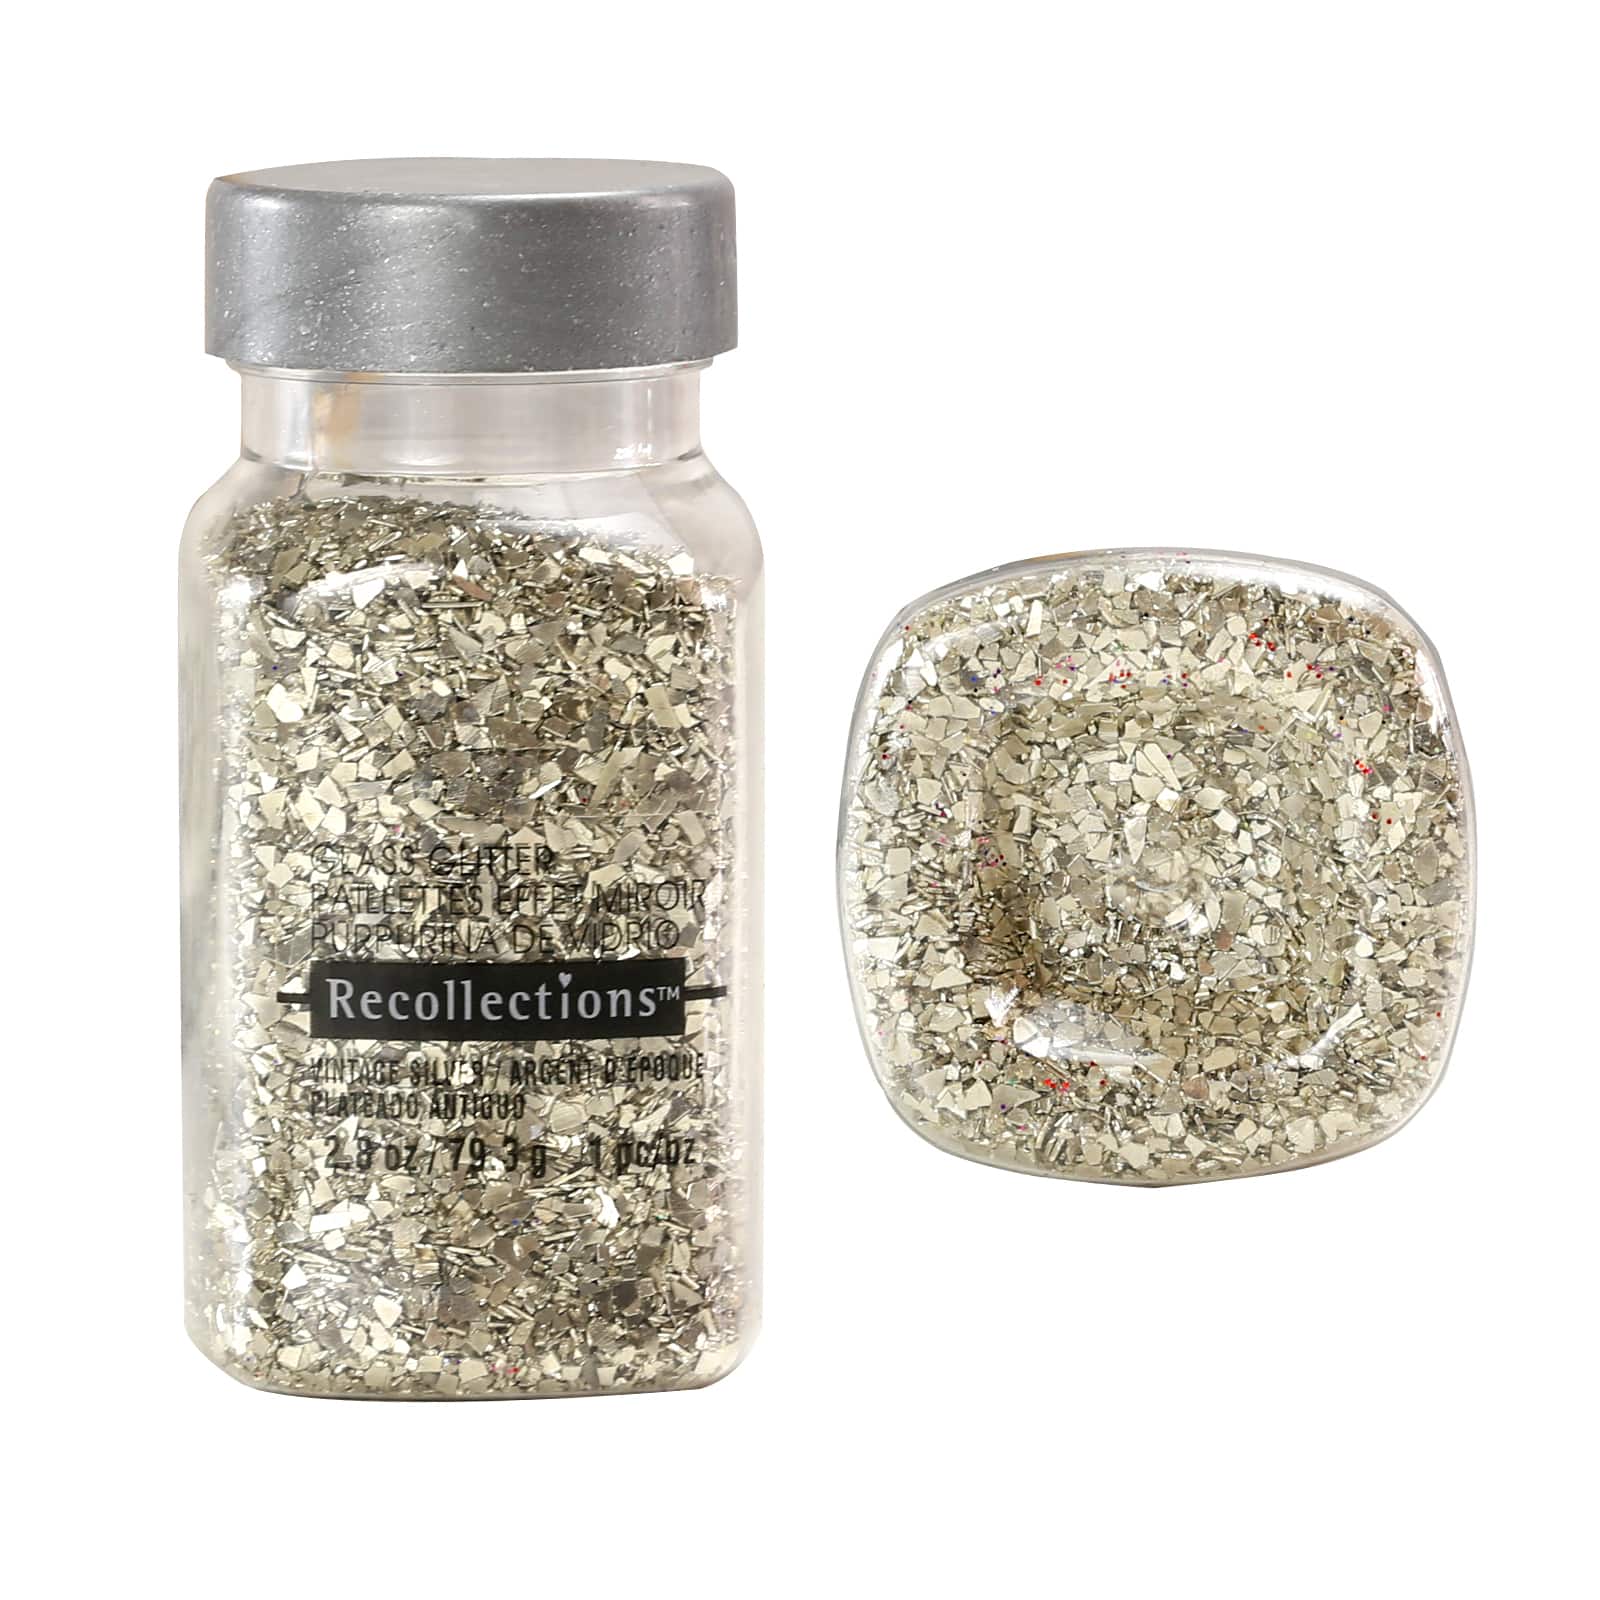 Specialty Glitter Gold Foil Flakes by Recollections | 0.07 | Michaels